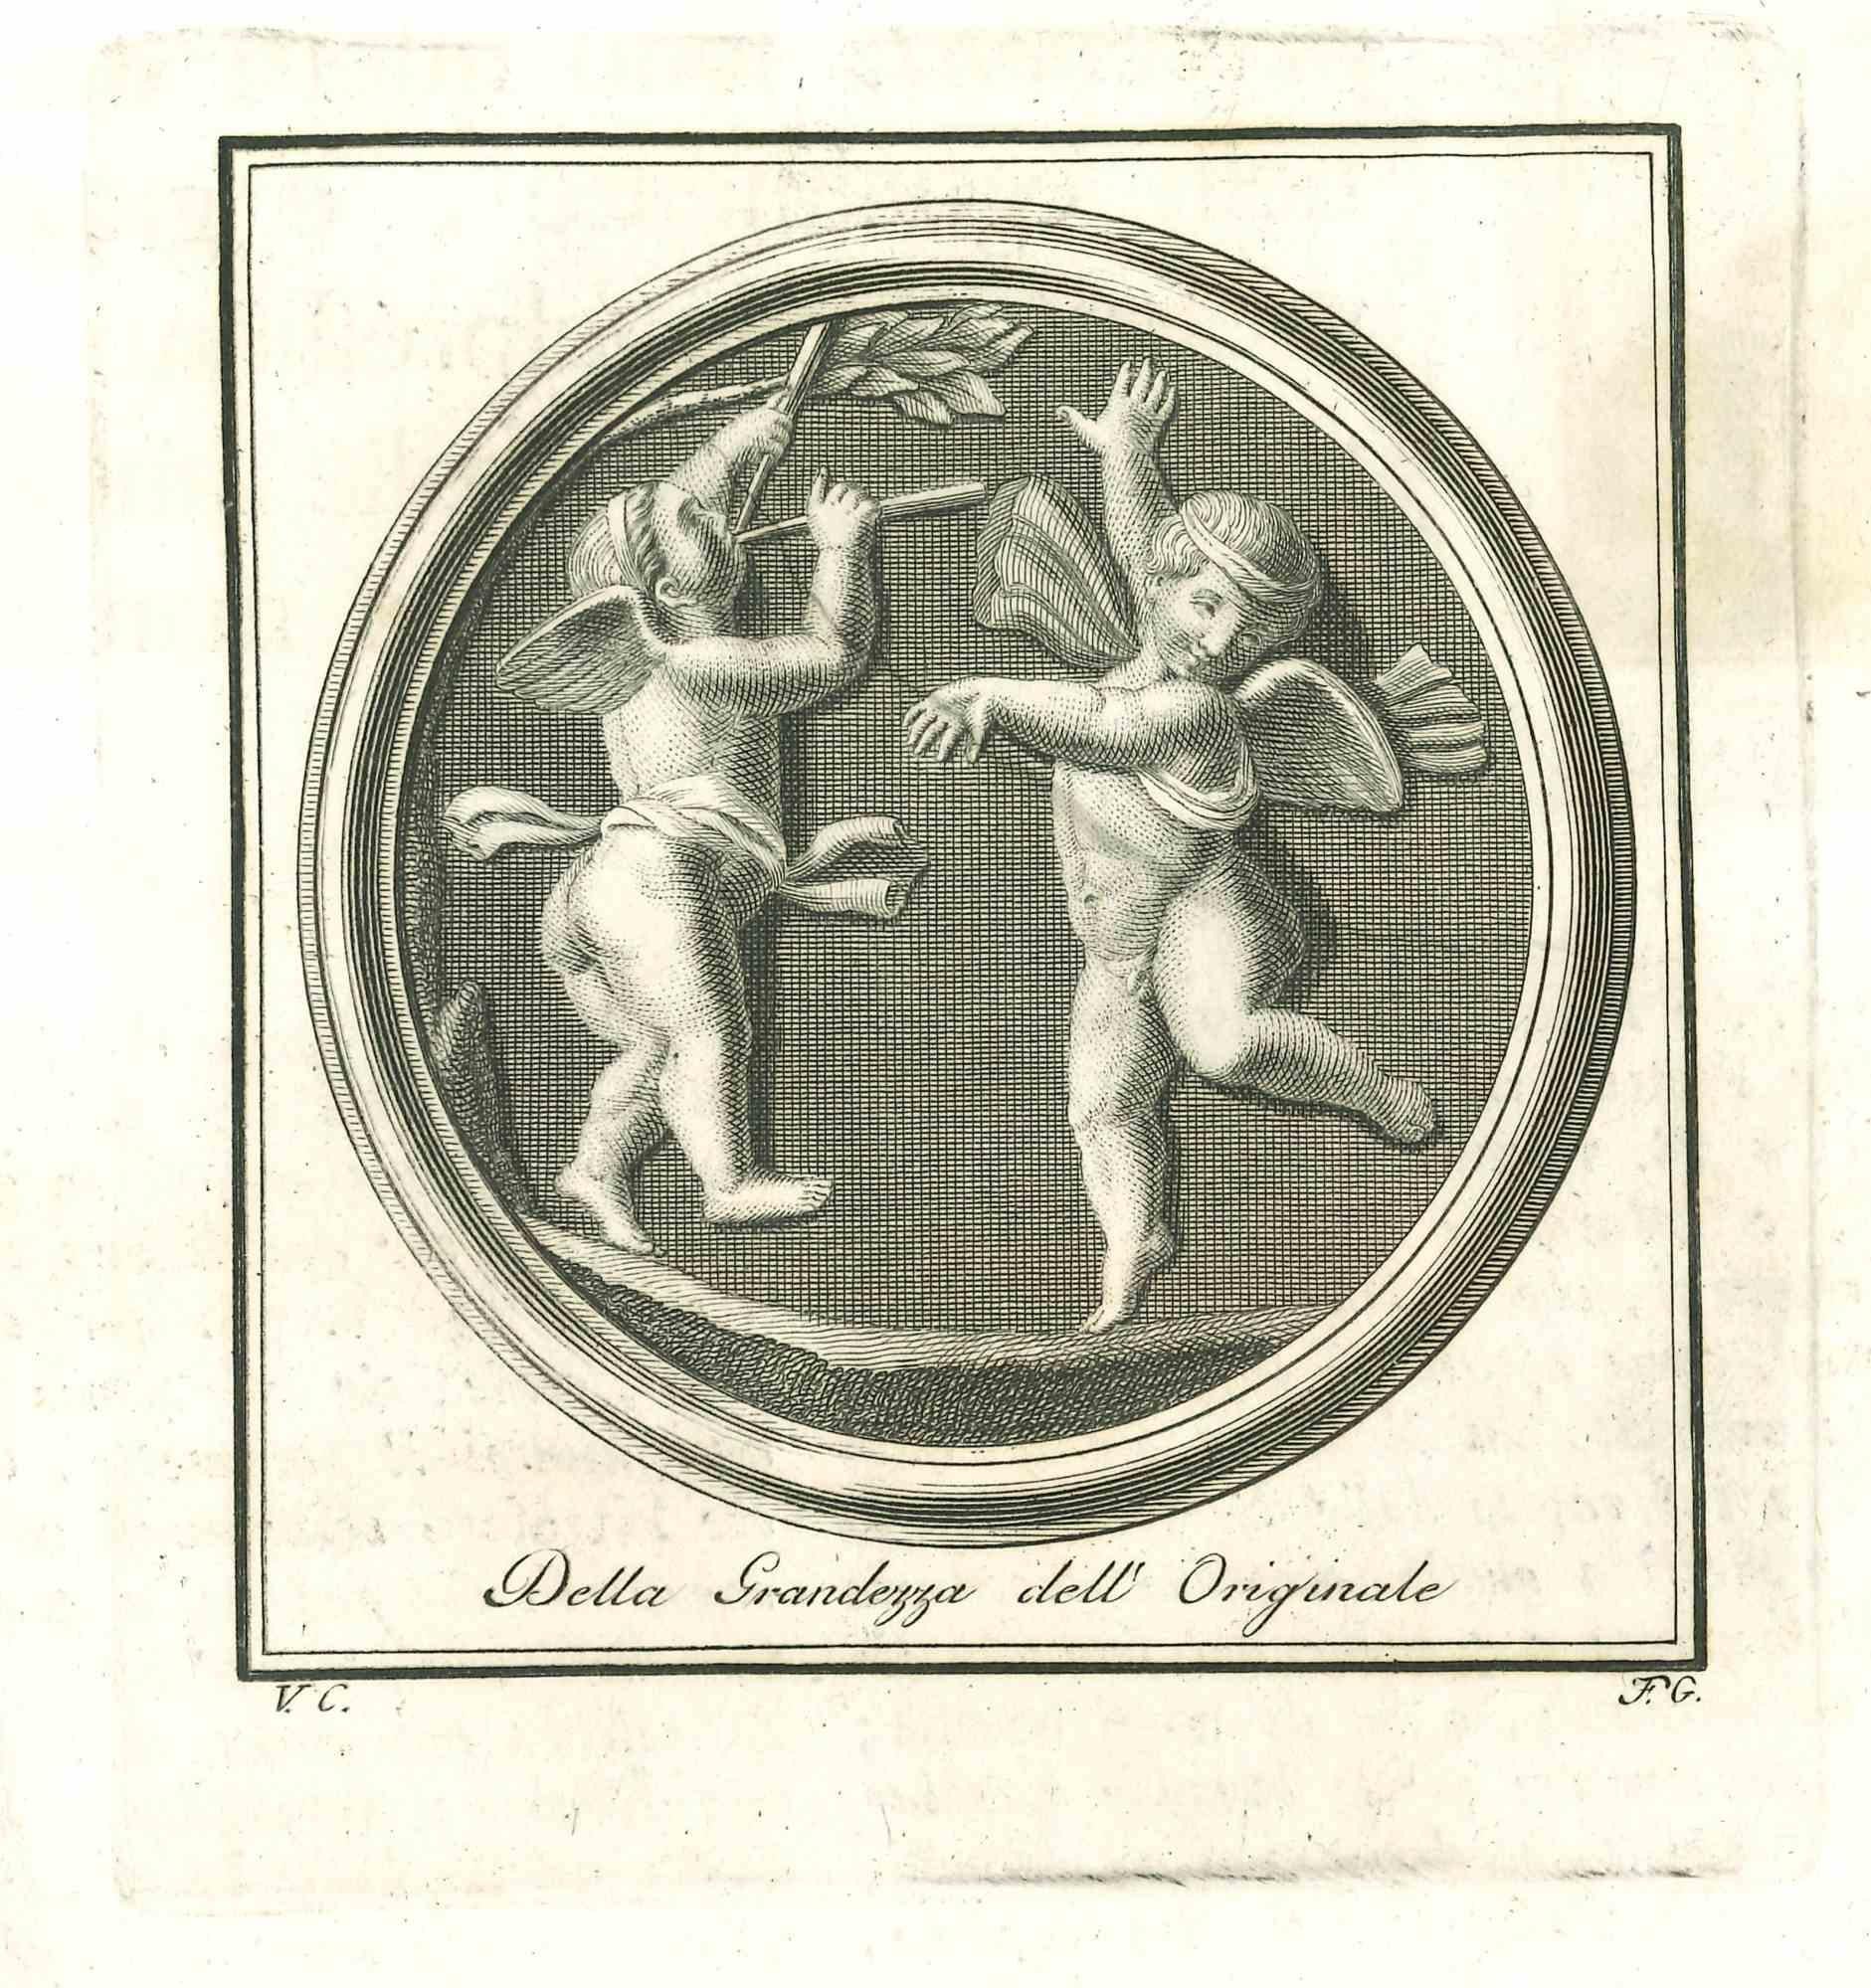 Ancient Roman Fresco, from the series "Antiquities of Herculaneum", is an original etching on paper realized by Vincenzo Campana in the 18th century.

Signed on the plate on the lower left.

Good conditions.

The etching belongs to the print suite